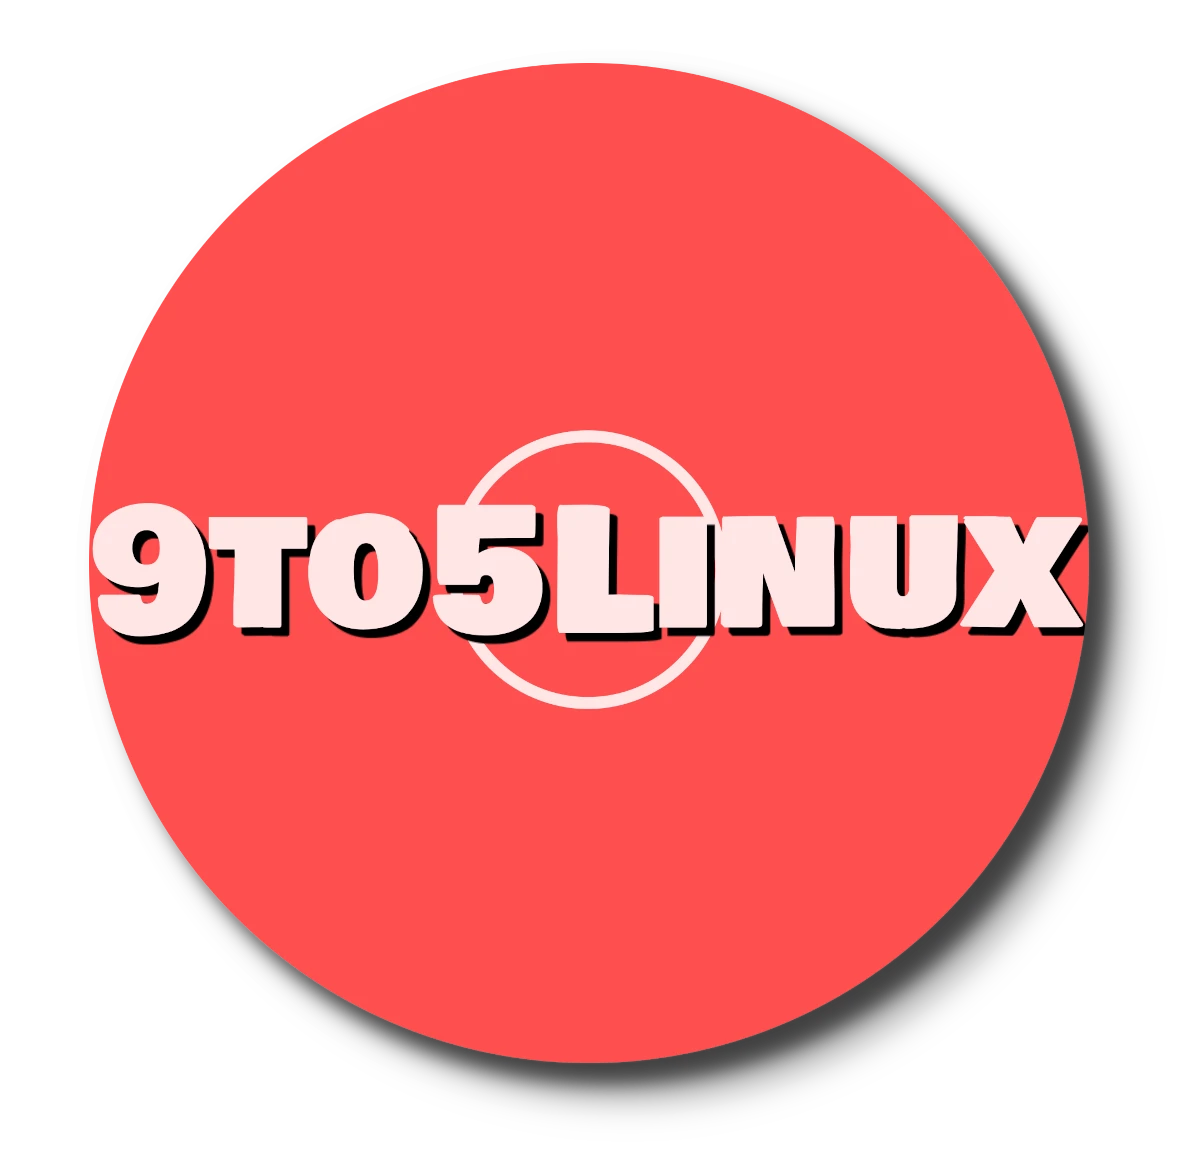 9to5linux